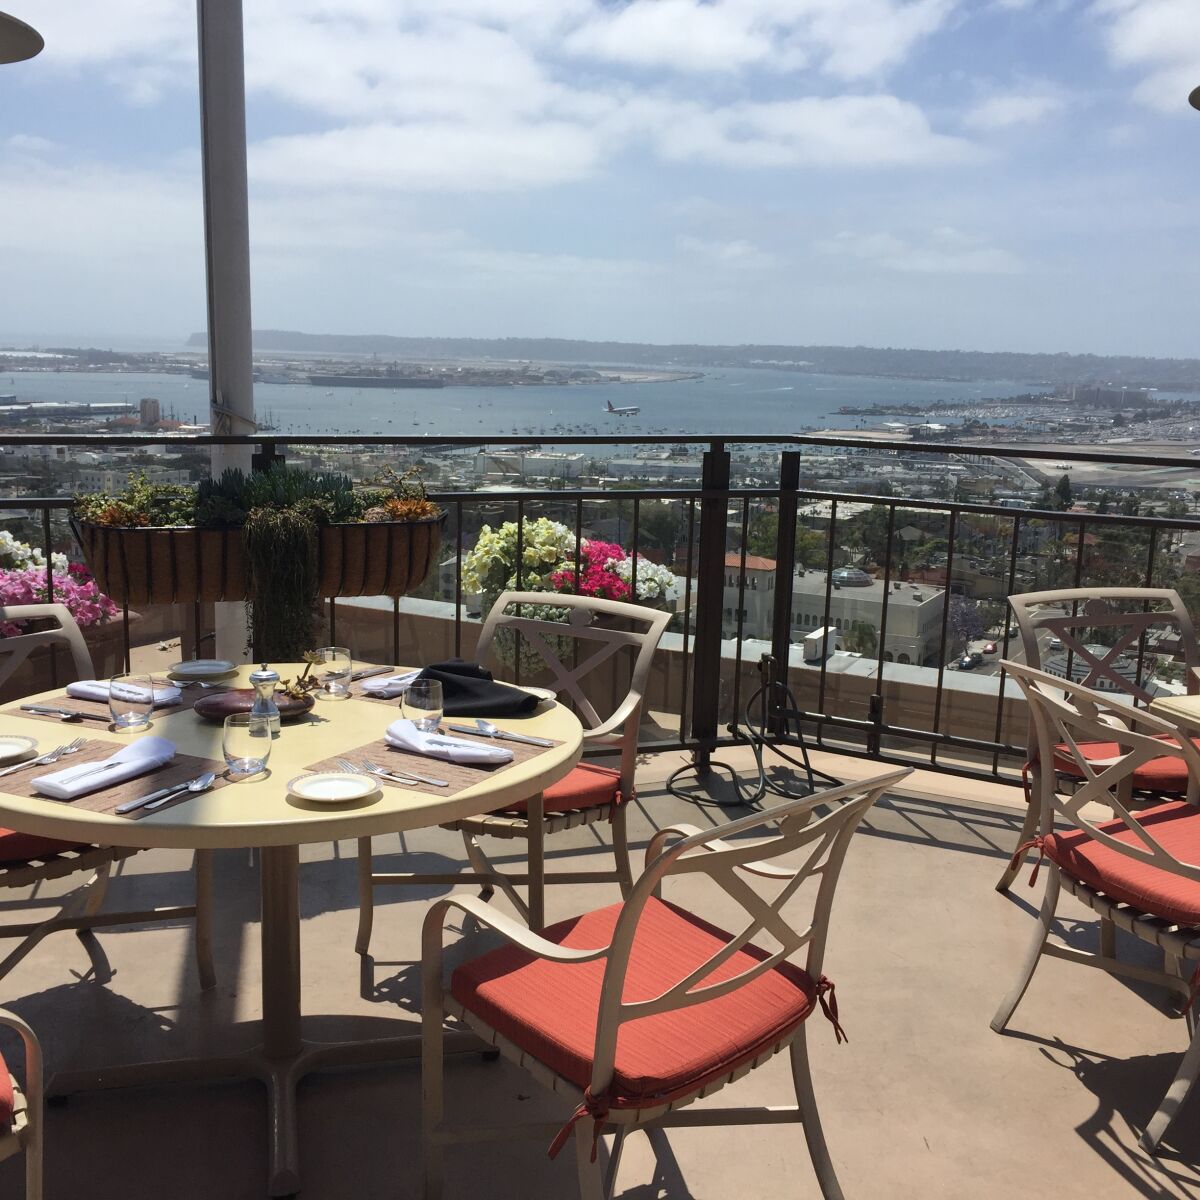 From its 12th-floor perch, Mr. A's patio offer's one of San Diego's most striking panoramas